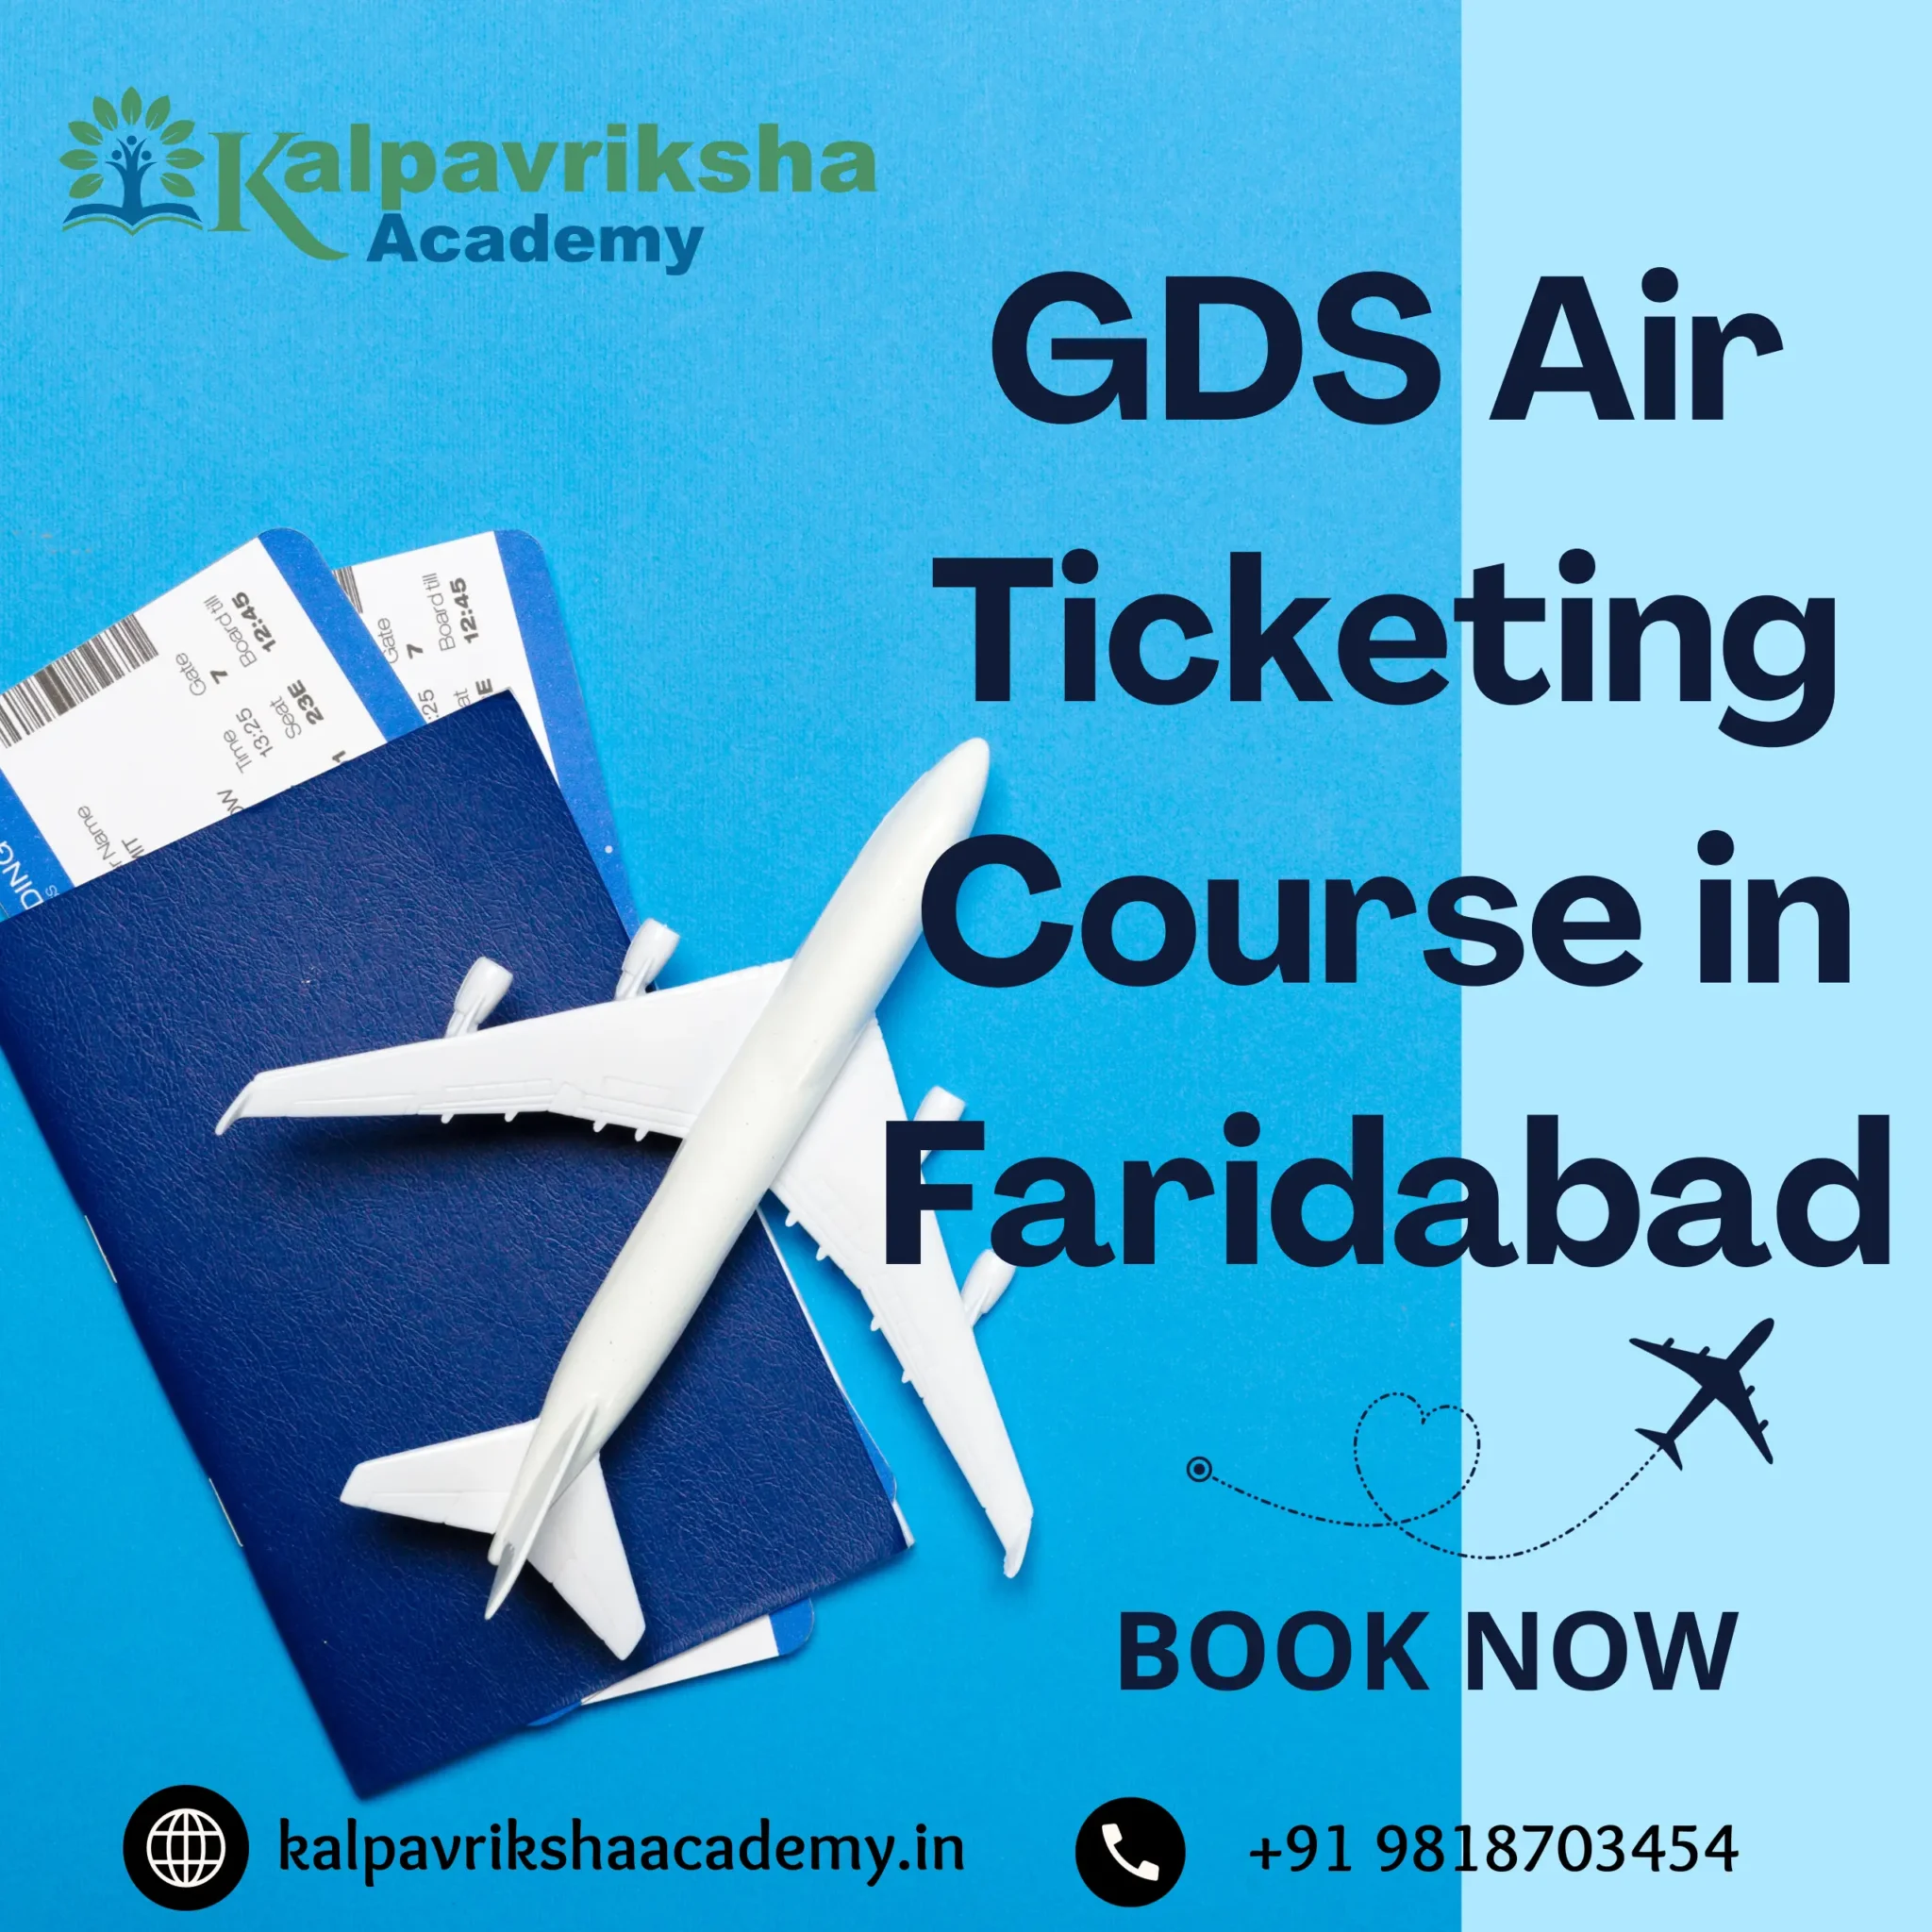 GDS Air Ticketing Course in Faridabad